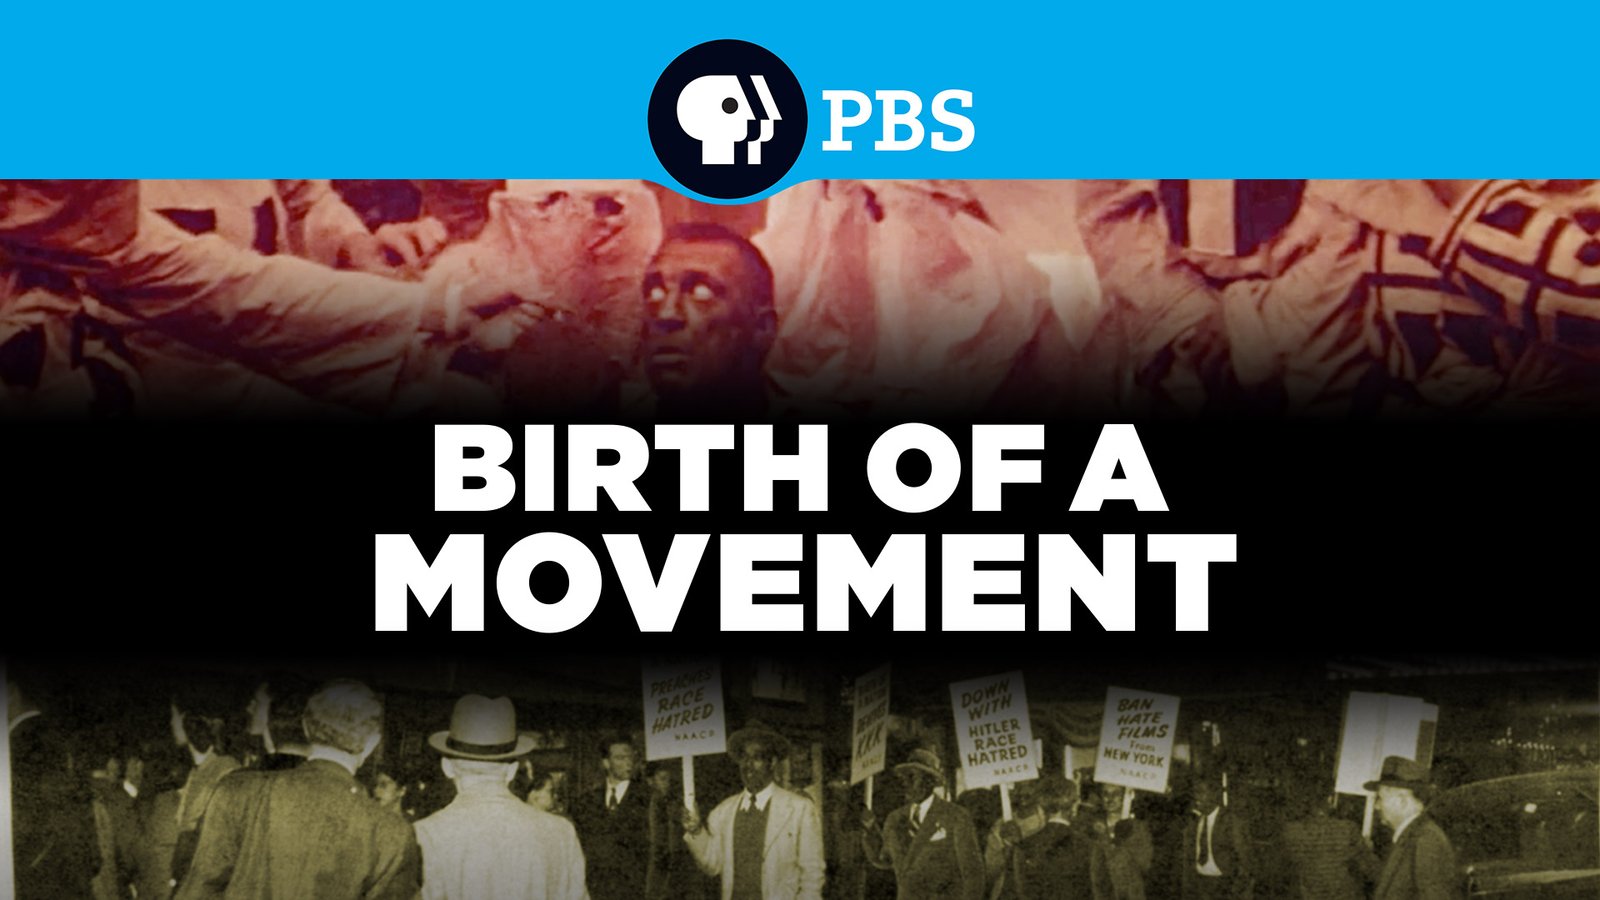 Birth Of A Movement - The Fight to Ban a Controversial Film